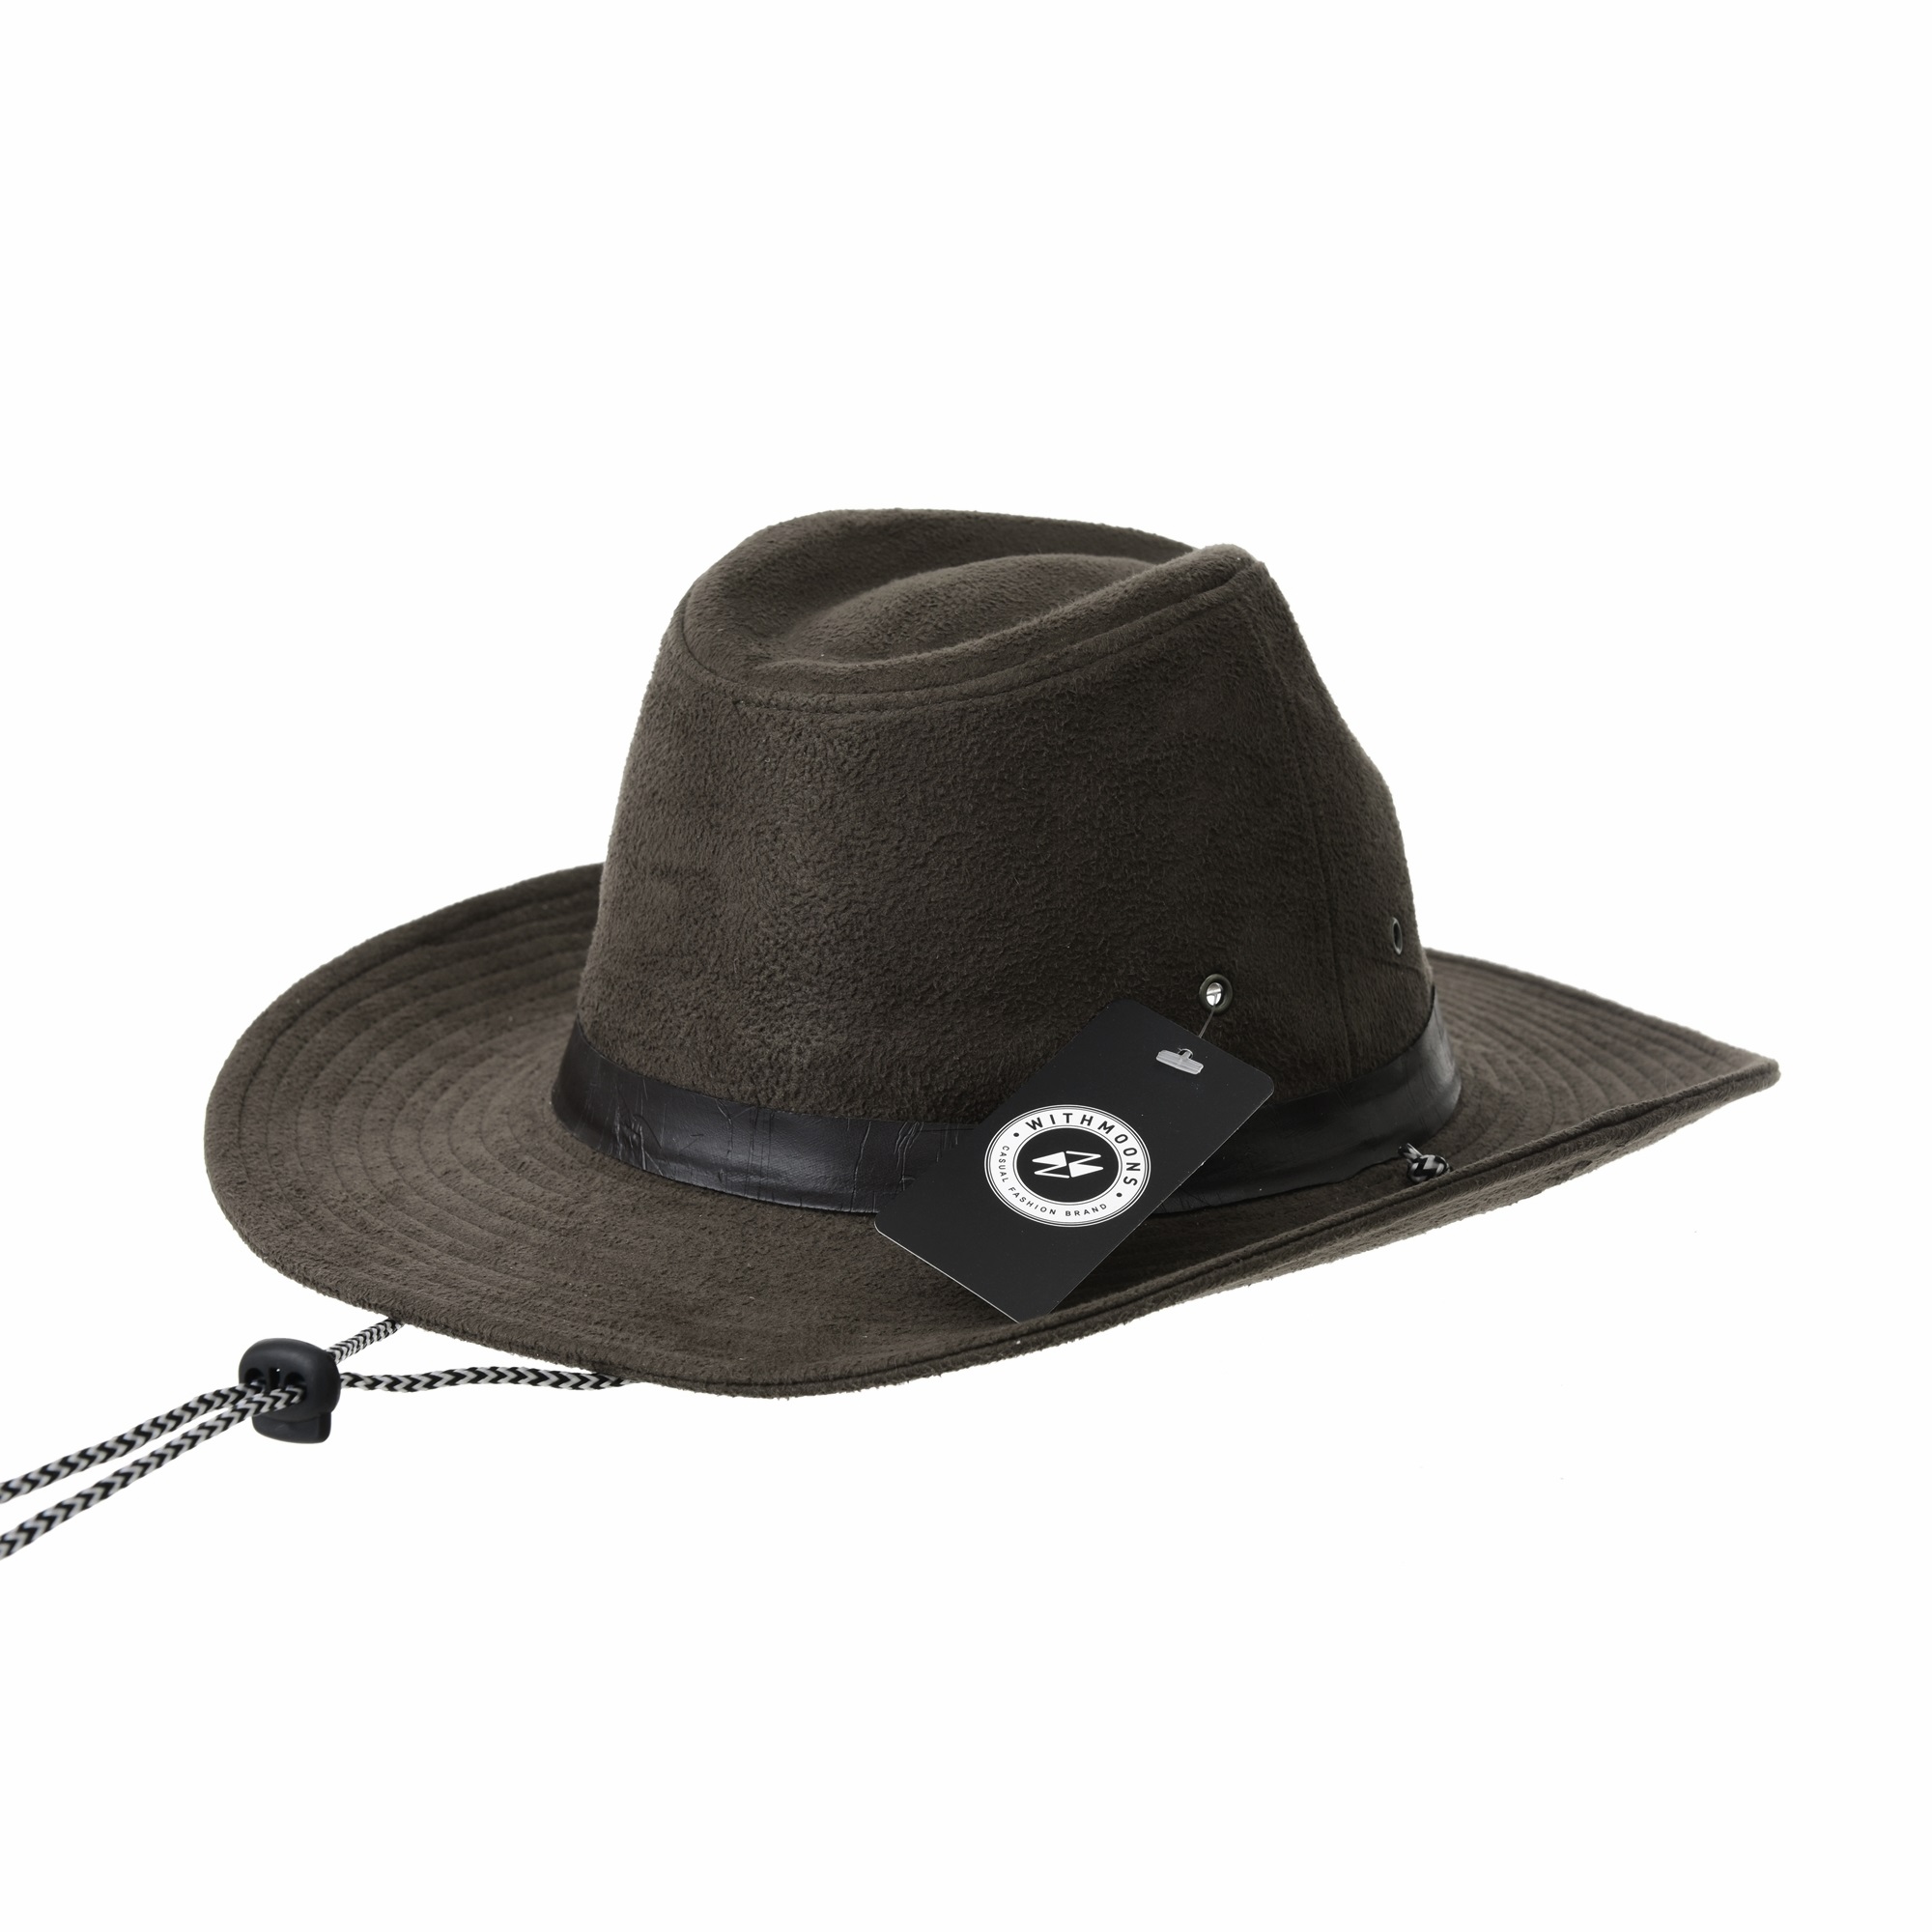 WITHMOONS Suede Indiana Jones Hat Outback Hat Fedora With Cord CD8858 (Brown) - image 3 of 5